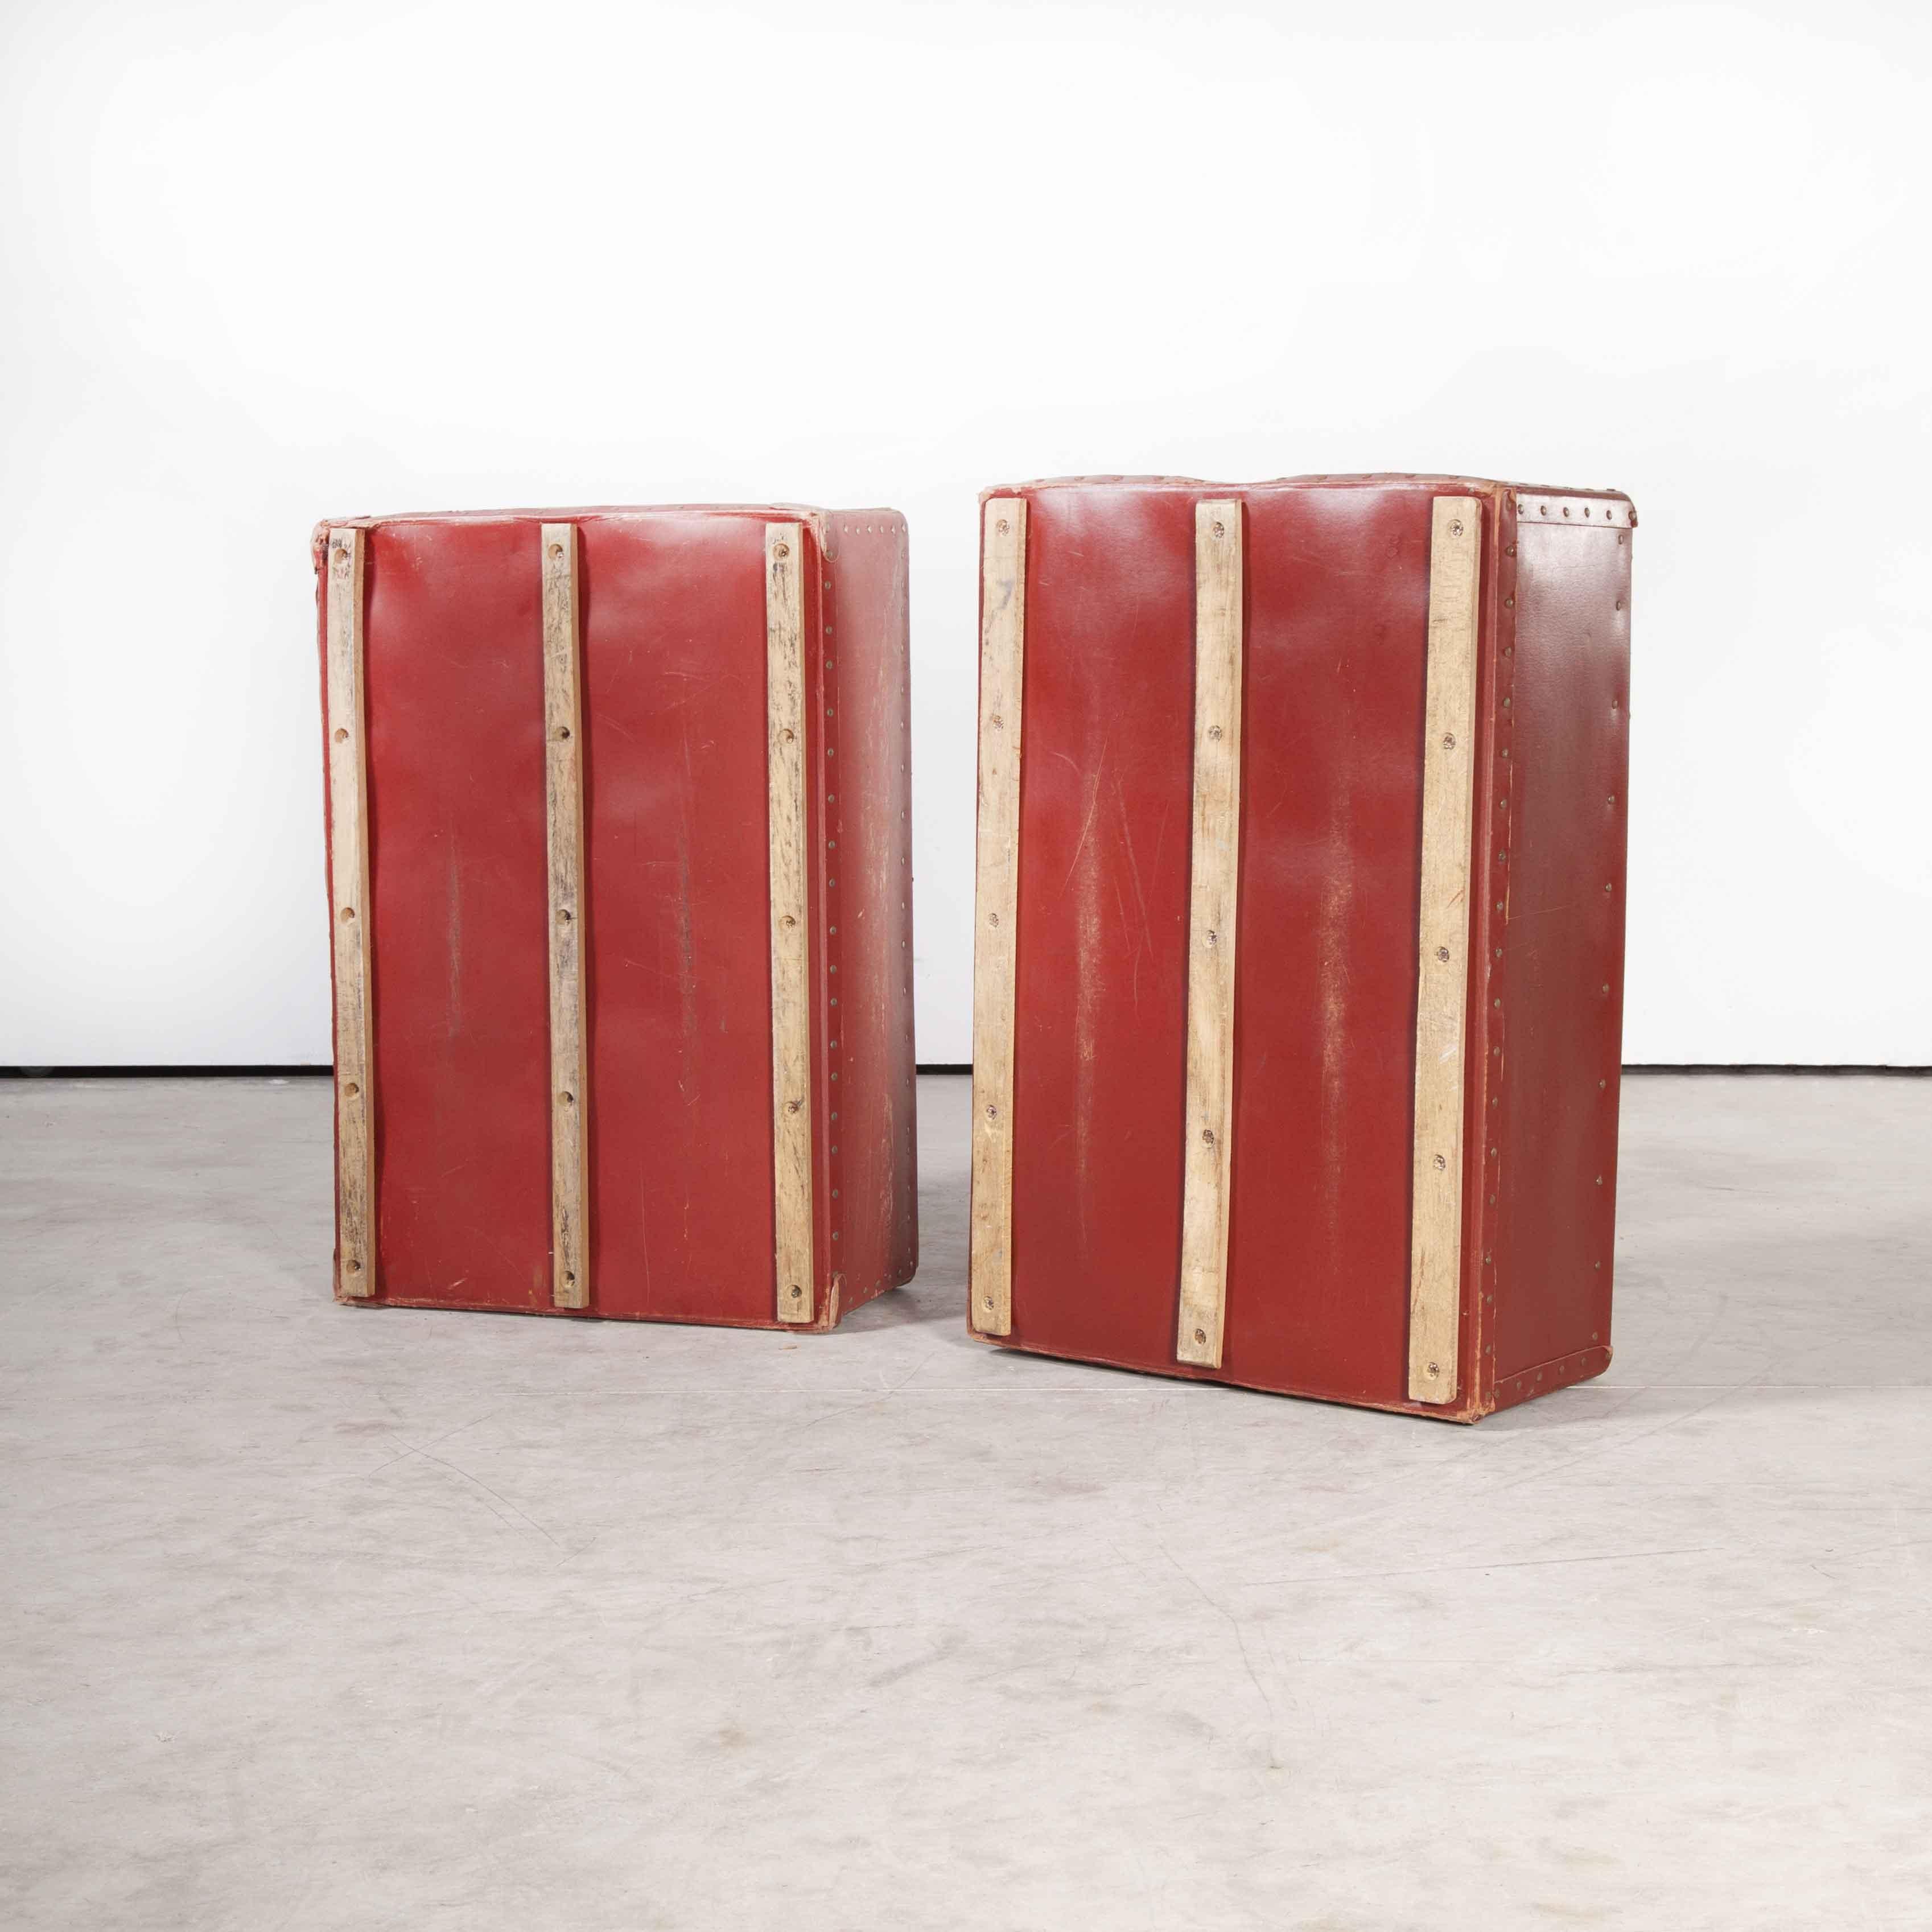 1940’s original Suroy industrial storage boxes – pair

1940’s original Suroy industrial storage boxes – pair. In 1853 the textile industrial revolution arrived in Loos, Nord France with the formation of the Esquermes factory by Alfred Thirez. The